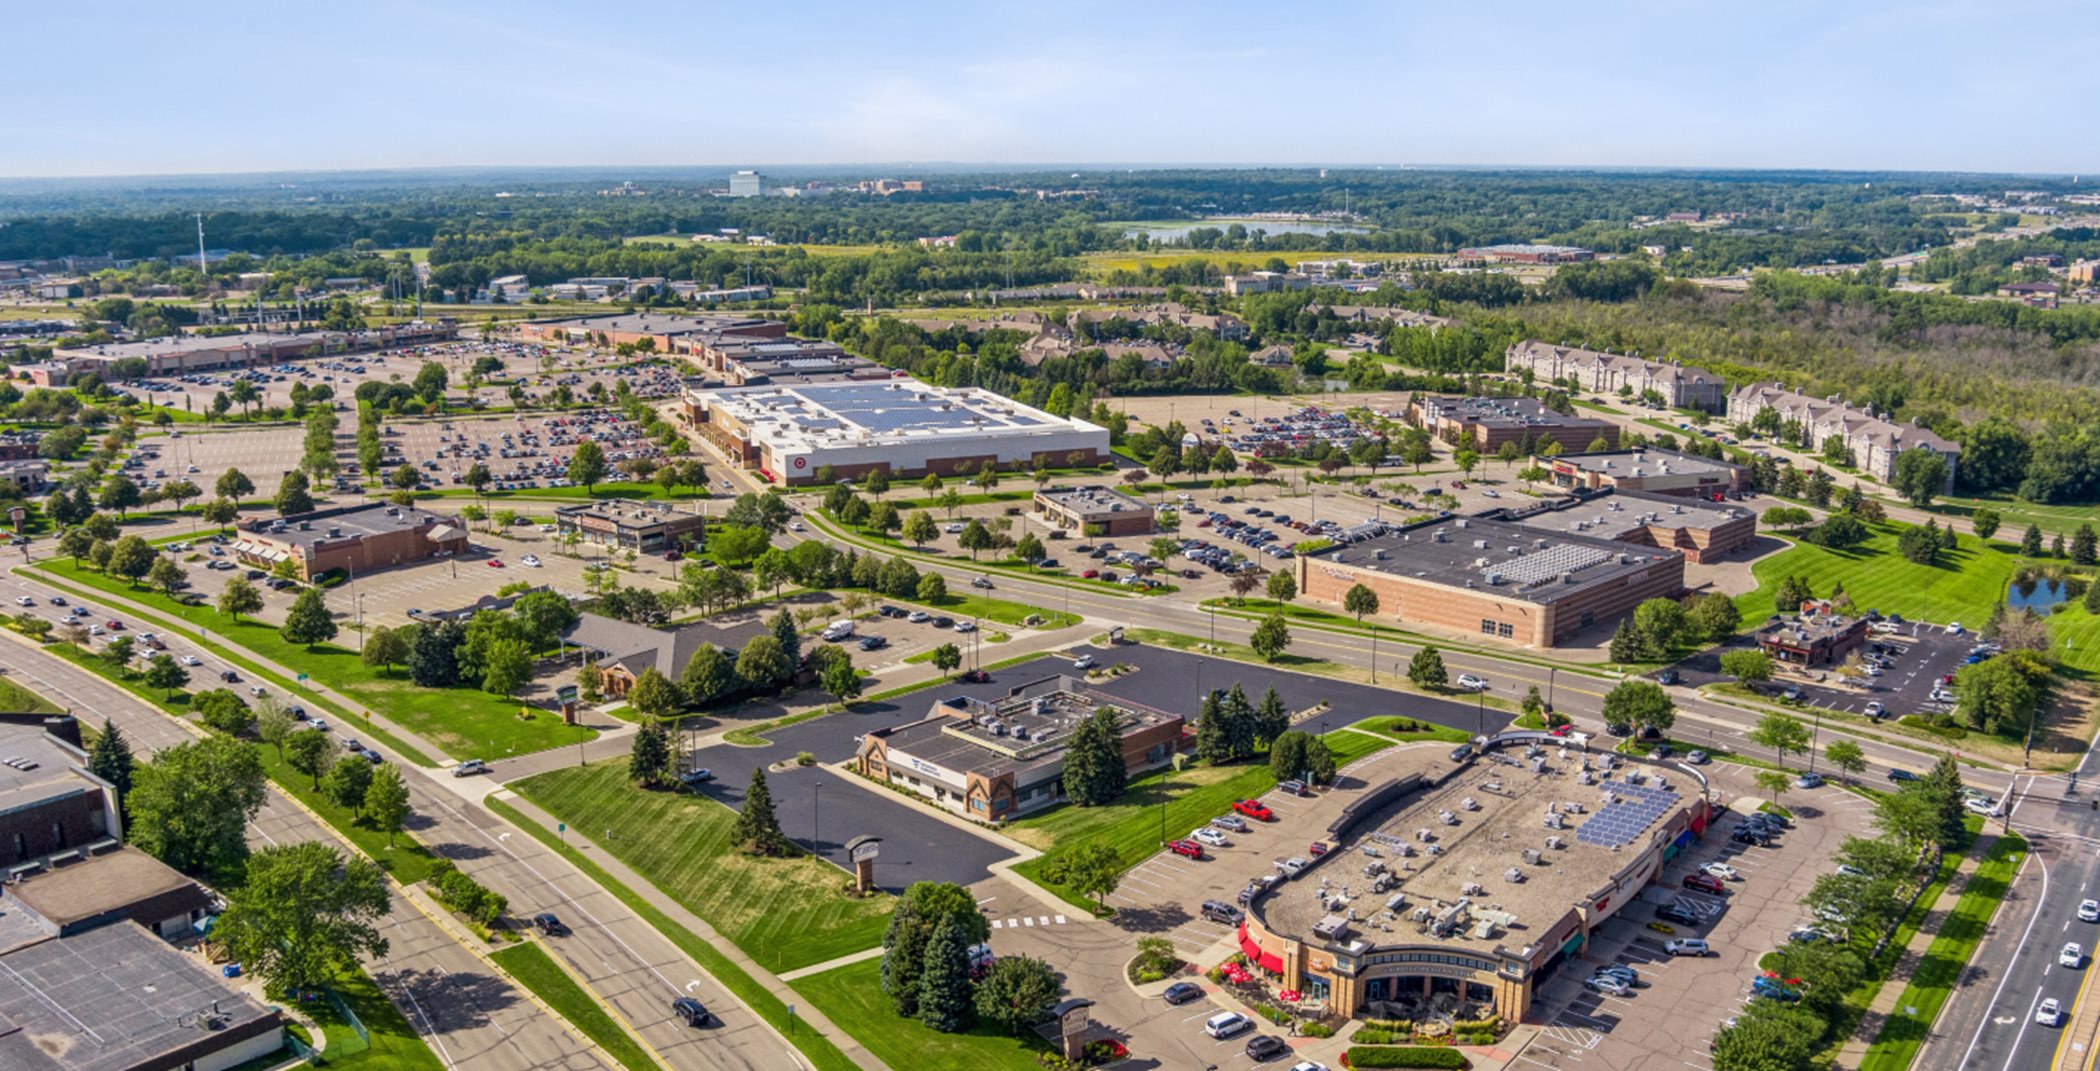 Westwind is in close proximity to shopping malls, grocery stores and retail centers